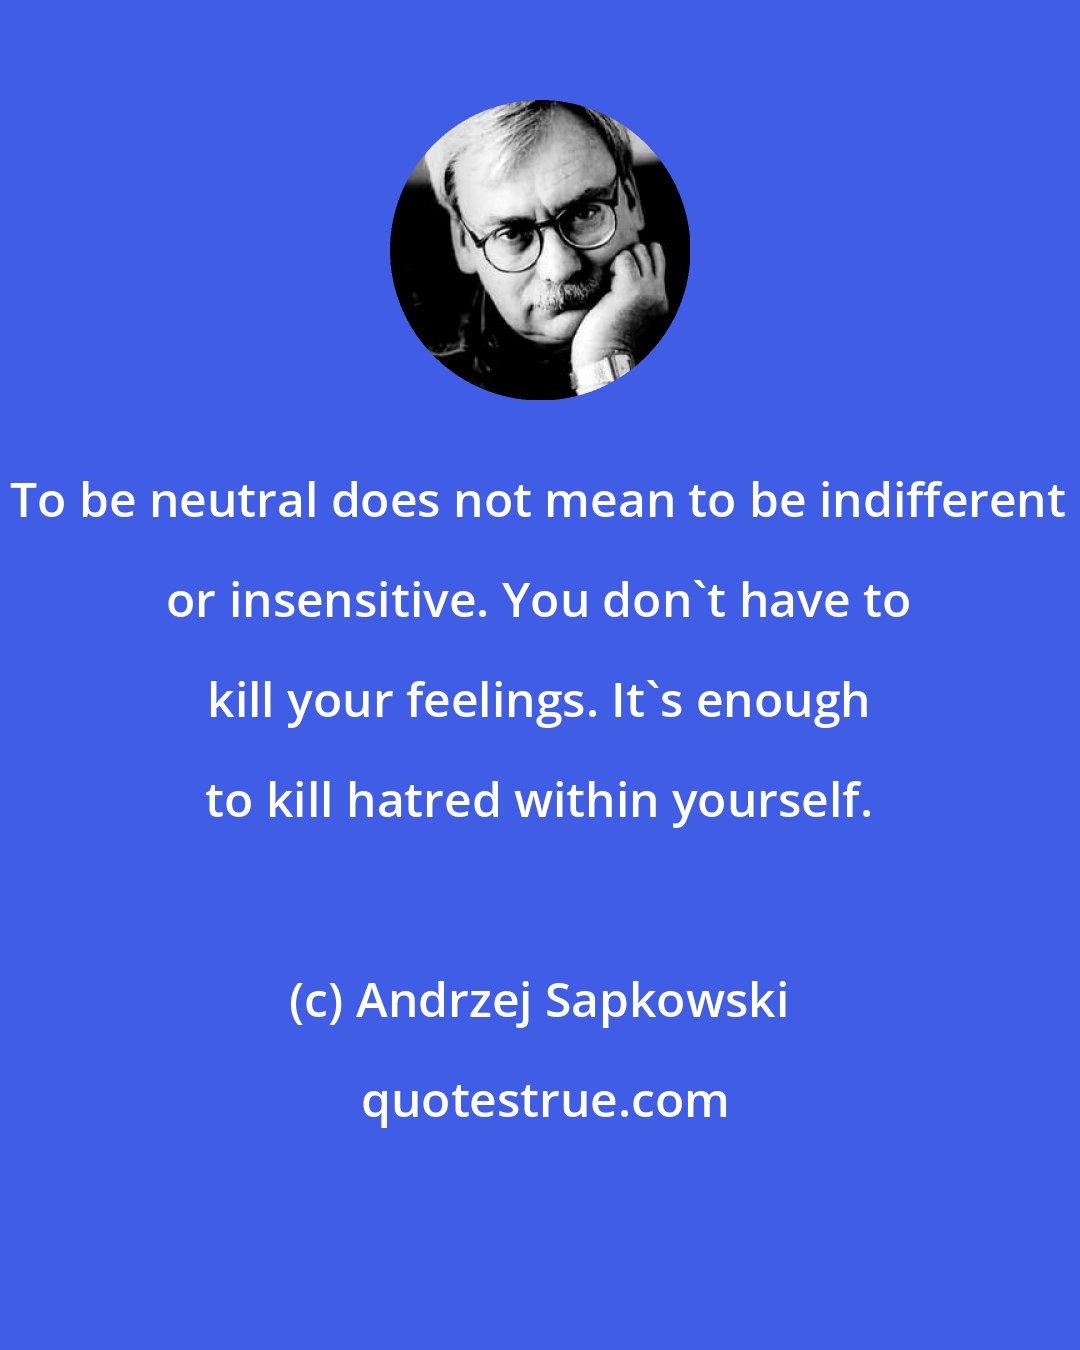 Andrzej Sapkowski: To be neutral does not mean to be indifferent or insensitive. You don't have to kill your feelings. It's enough to kill hatred within yourself.